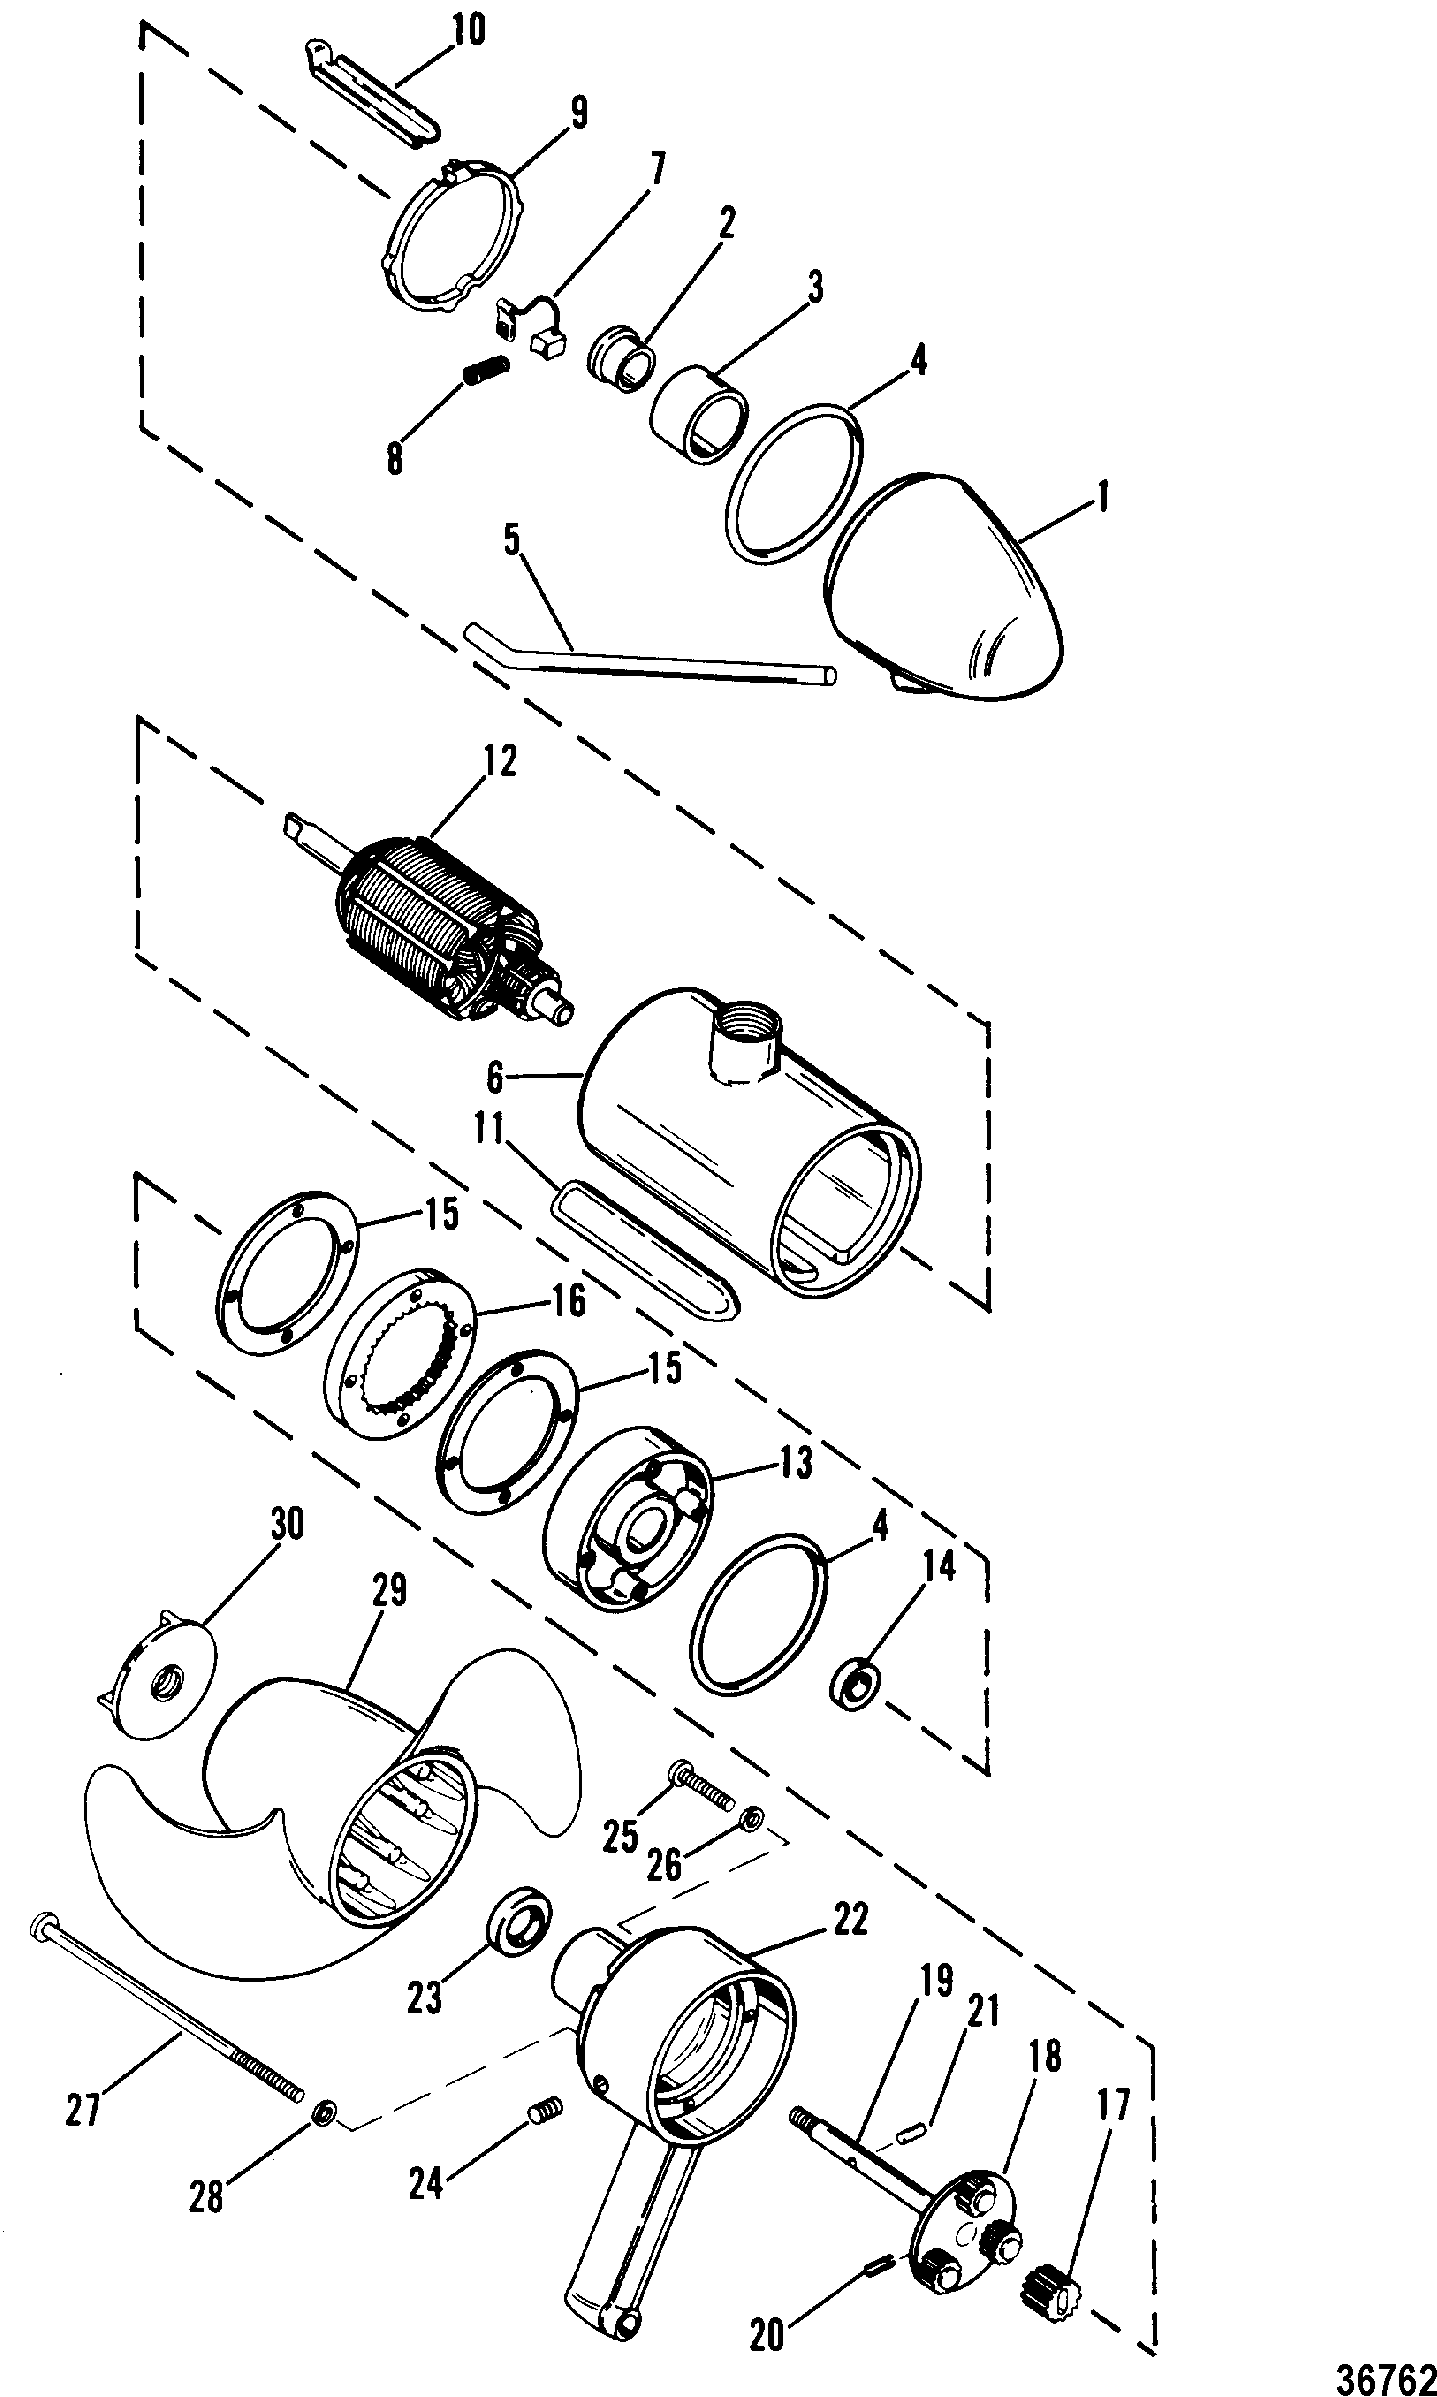 ELECTRIC MOTOR AND GEAR HOUSING